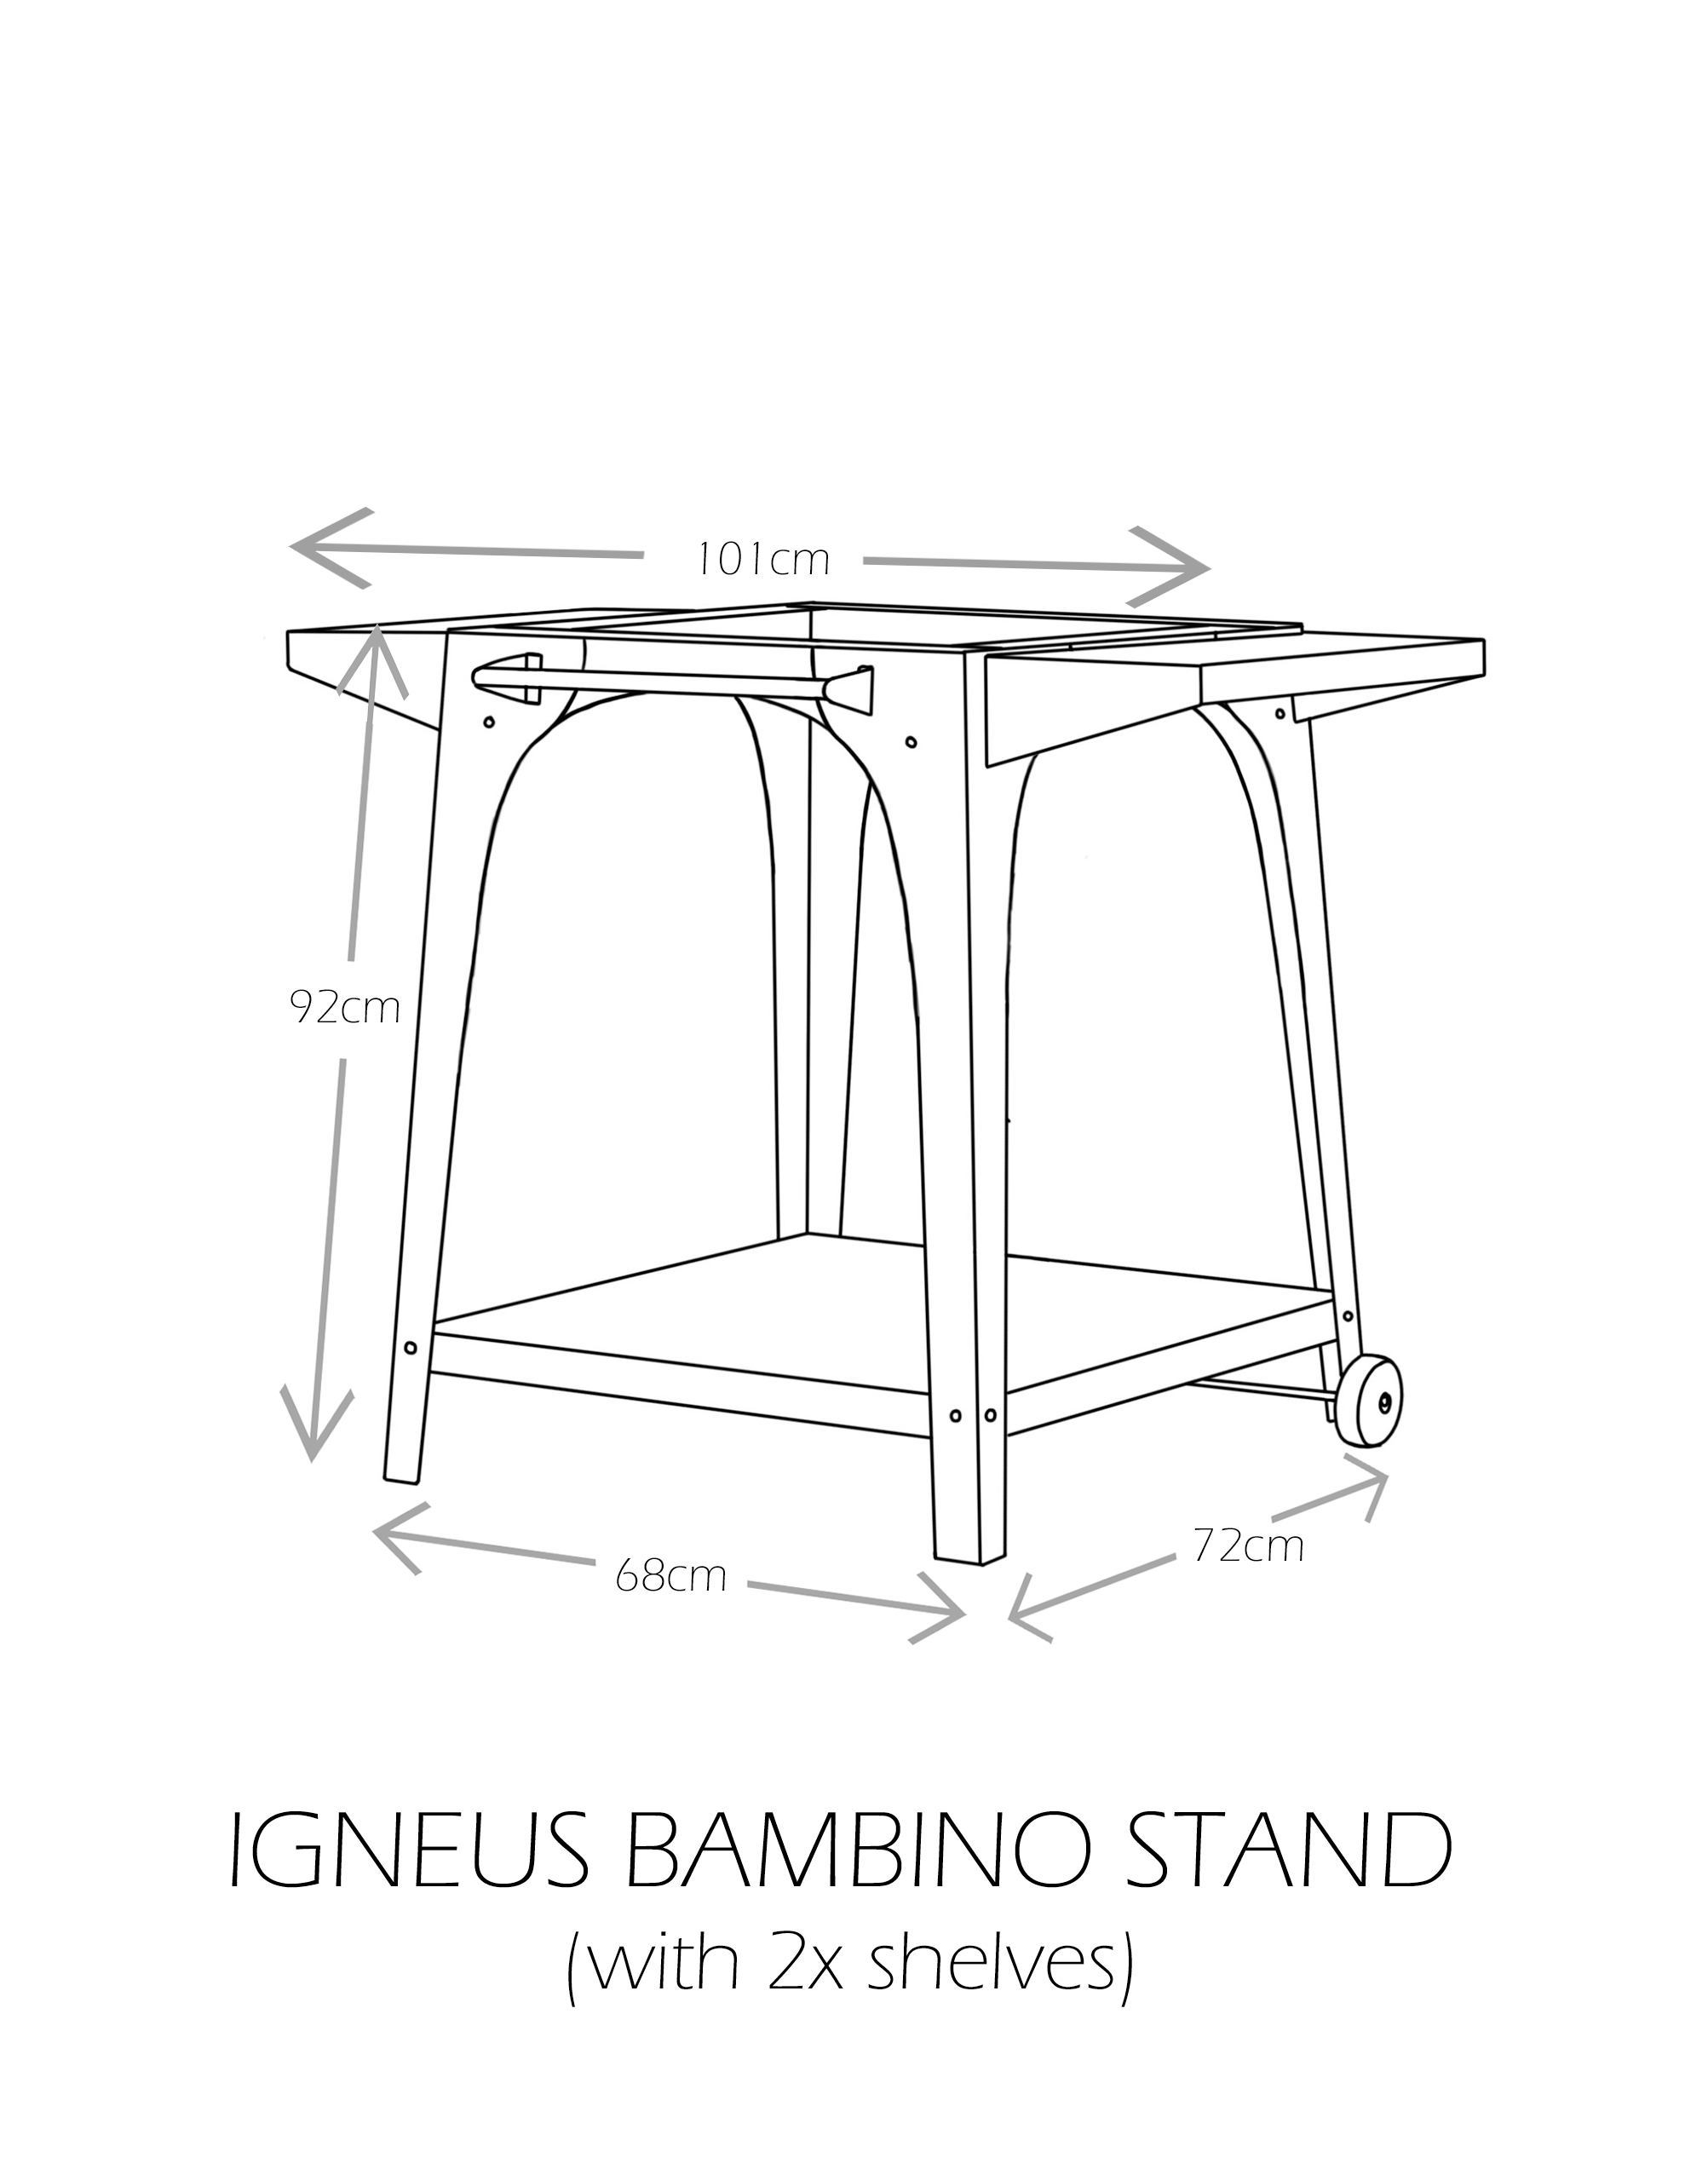 Igneus Bambino stand with 2x shelves - dimensions